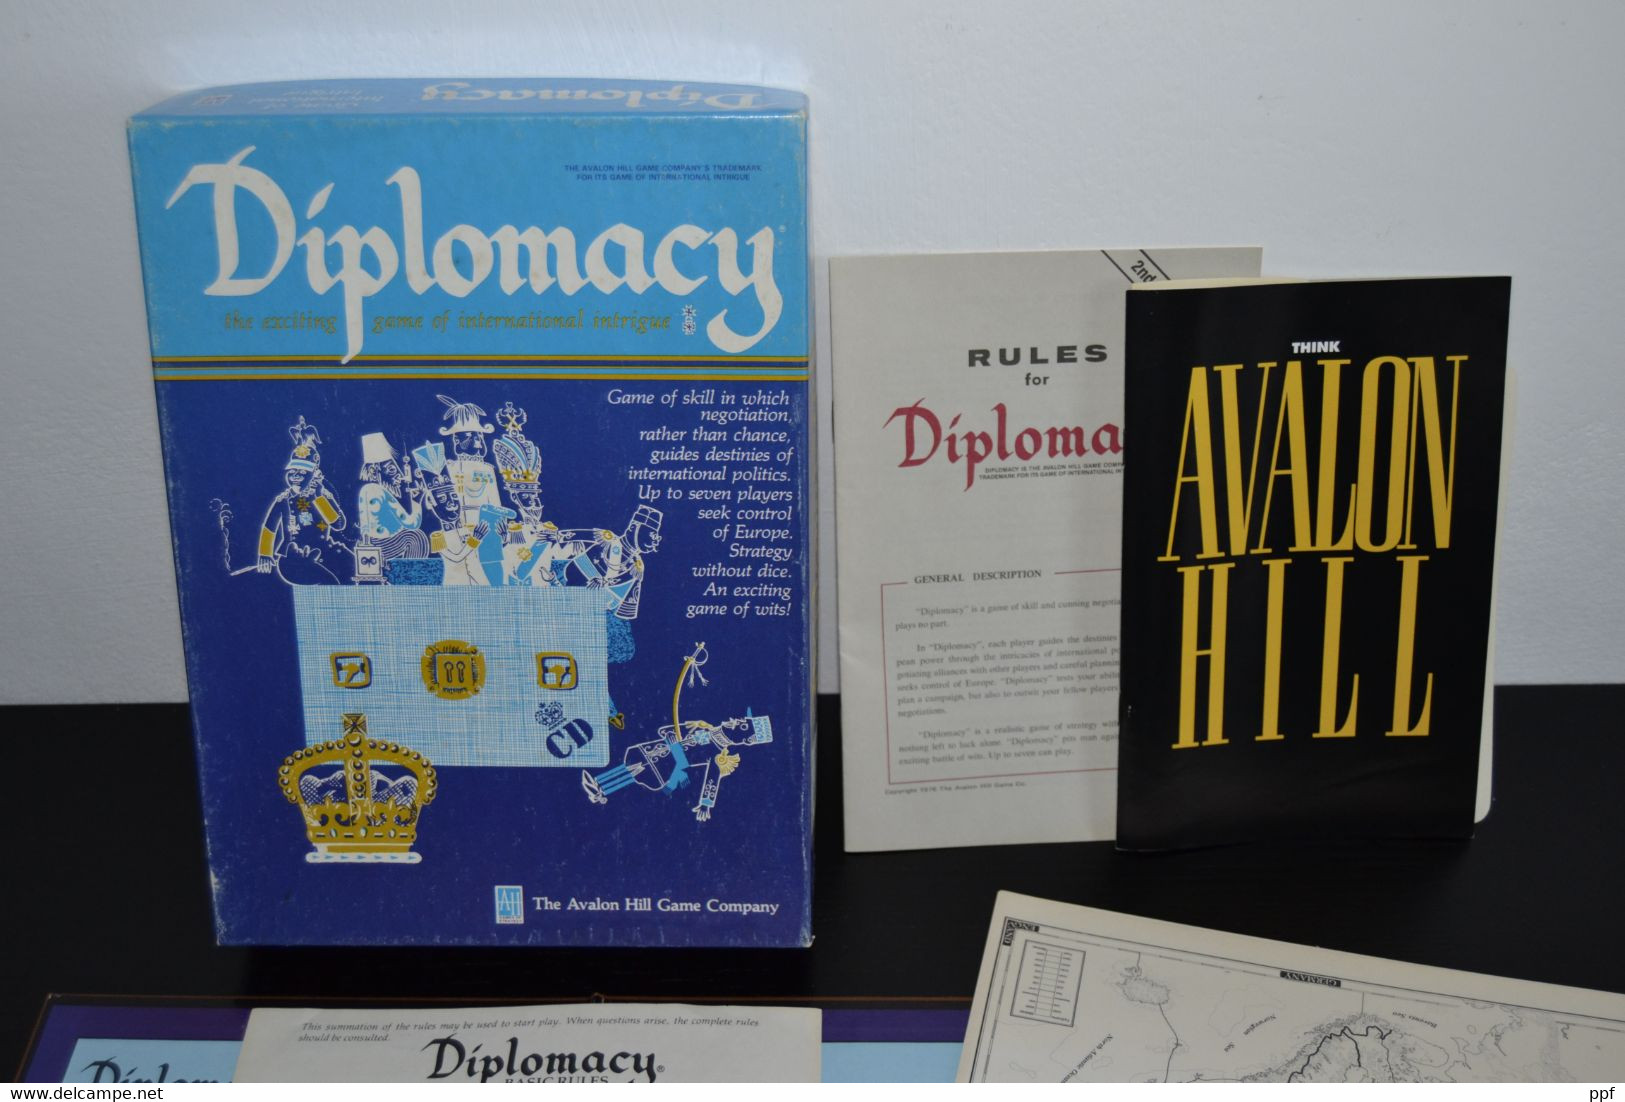 Rare strategy board game "Diplomacy" come in and see the pictures.